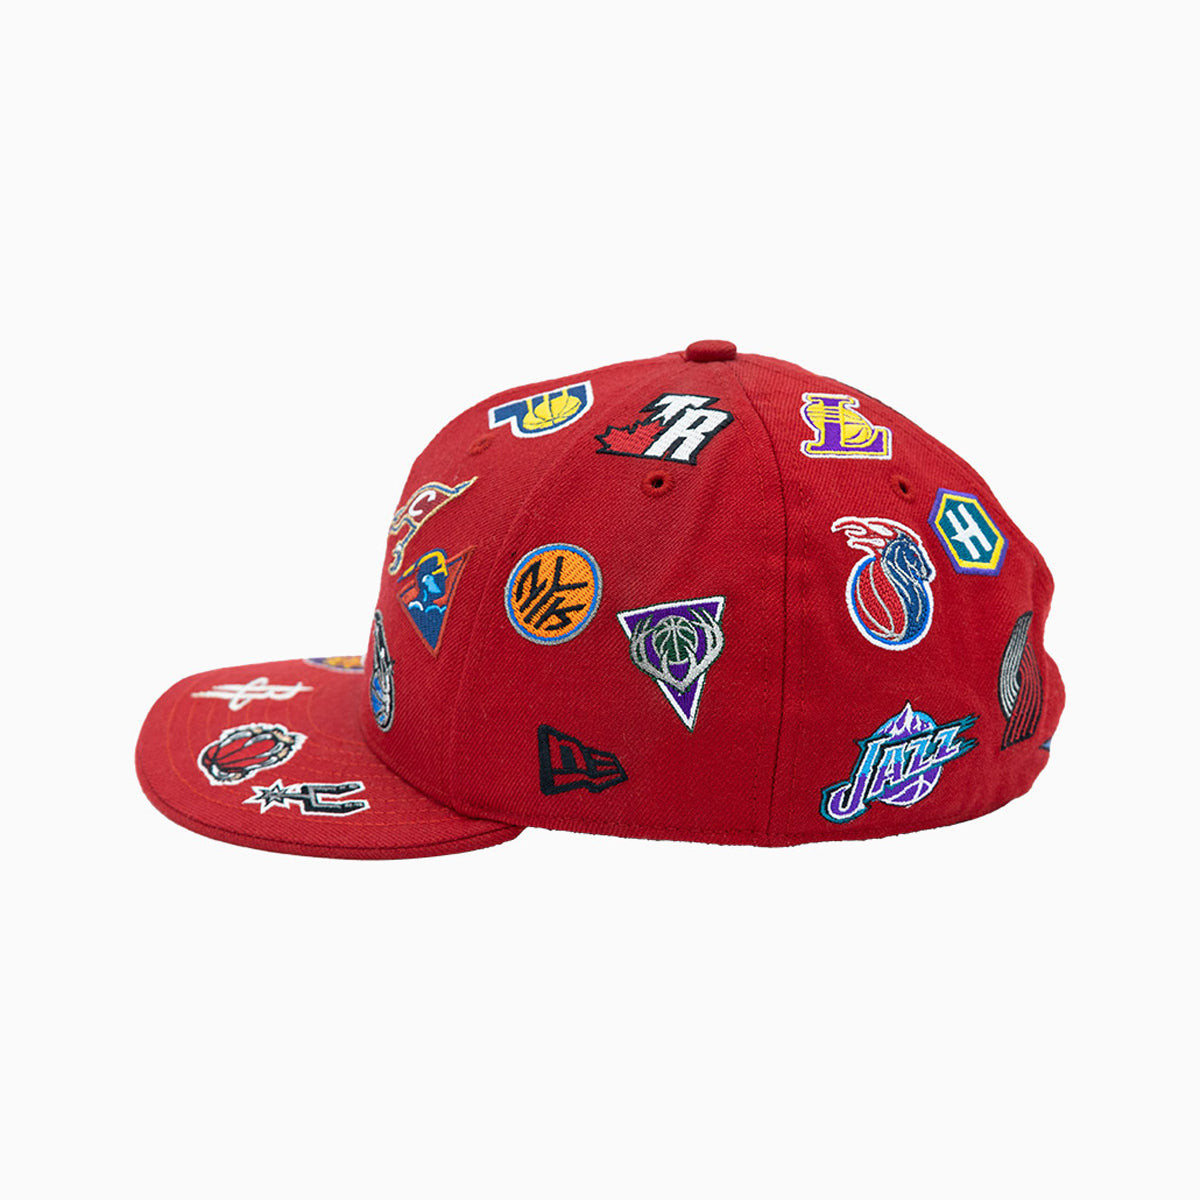 NBA All Star Logo 59FIFTY Fitted Hat